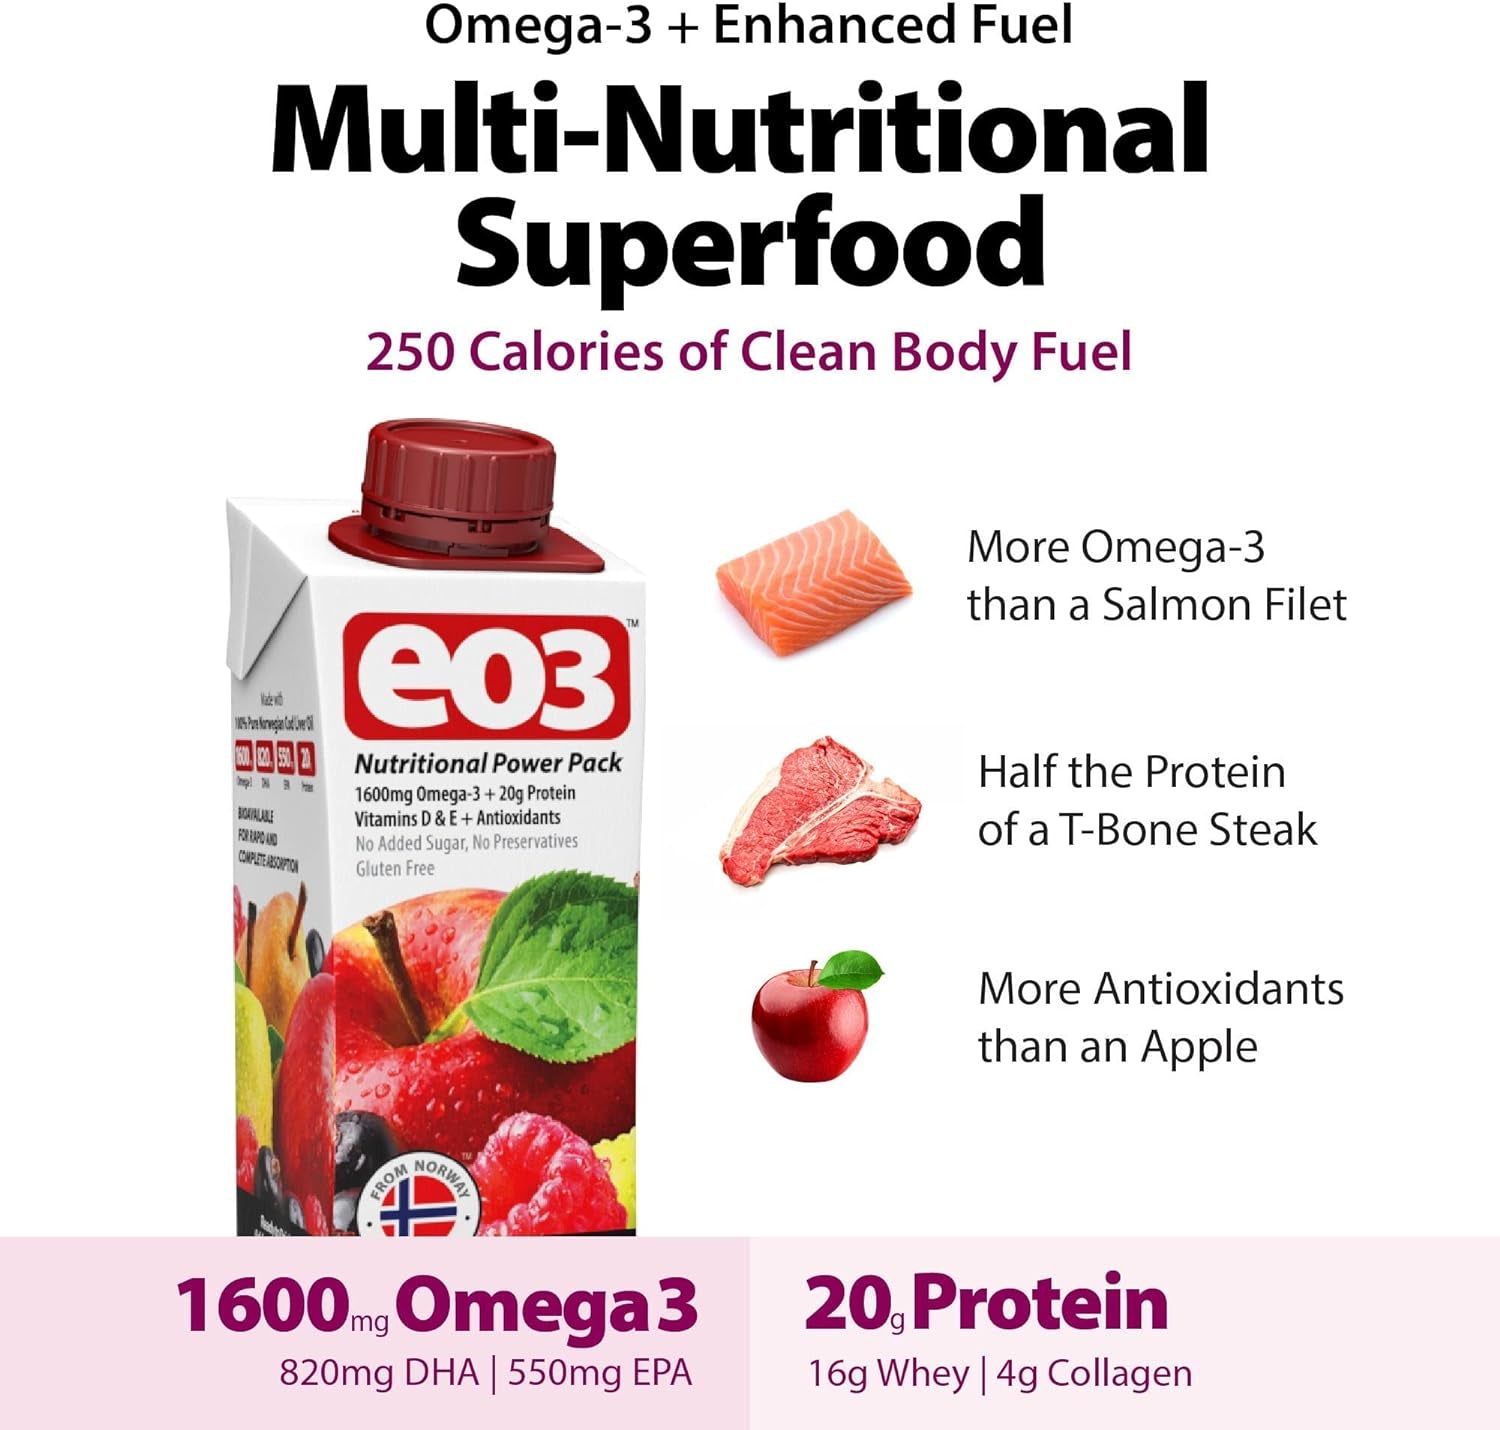 Omega-3 Multi-Nutritional Fruit Smoothie | 100% Cod Liver Oil | Whey Protein, Vitamins, Antioxidants| Gluten Free, No Added Sugar, No Preservatives | Ready-To-Drink | 12 Pack, 8.4 Fl Oz